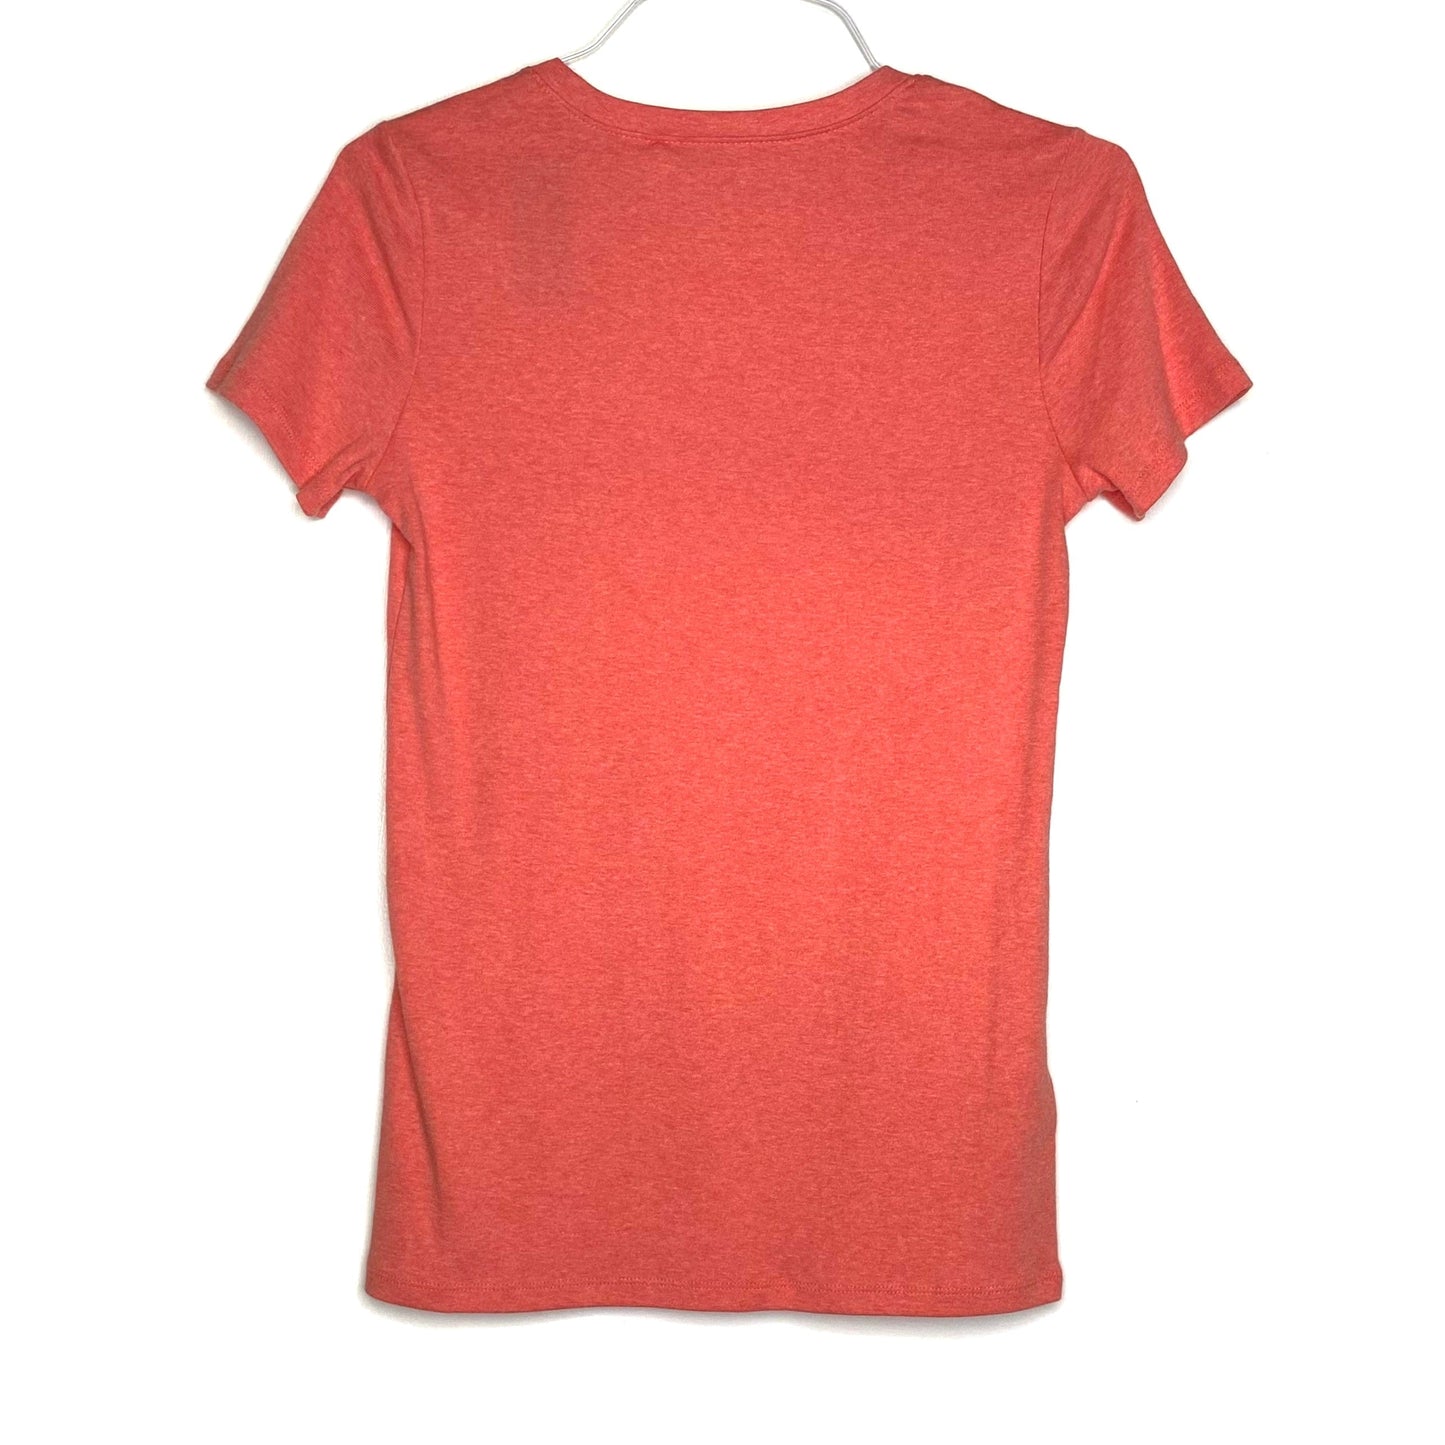 Eddie Bauer Womens Size M Coral Pink Activewear Top S/s NWT